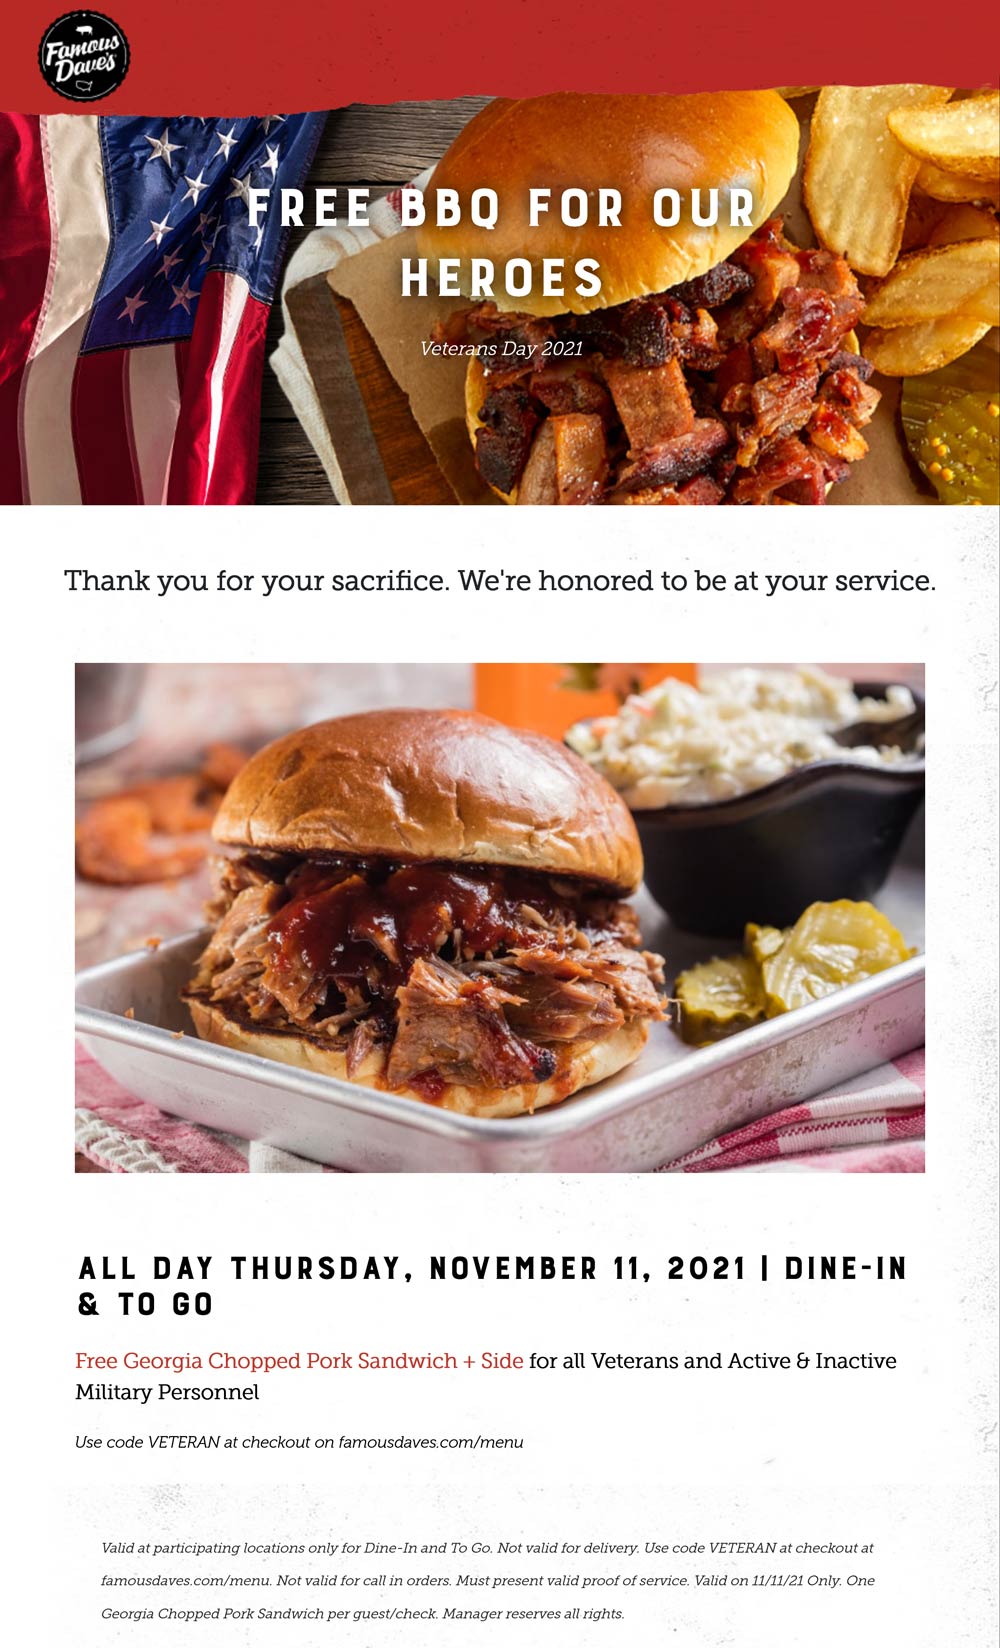 Famous Daves restaurants Coupon  Military enjoy a free bbq pork sandwich + side Thurs at Famous Daves via promo code VETERAN #famousdaves 